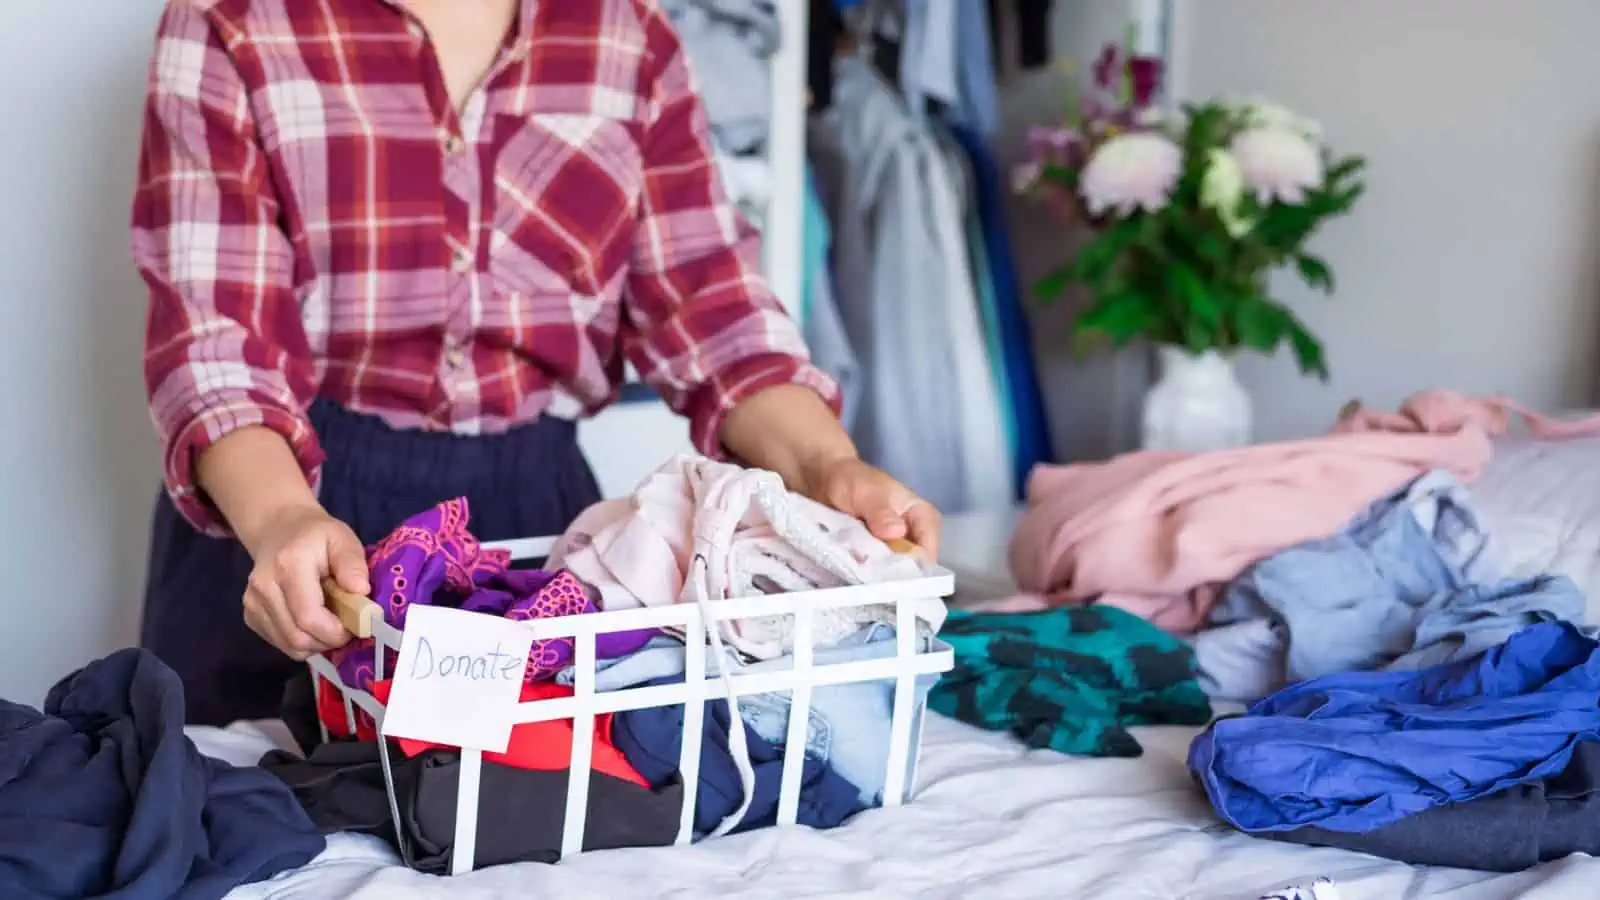 woman sorting clothing into decluttering pile